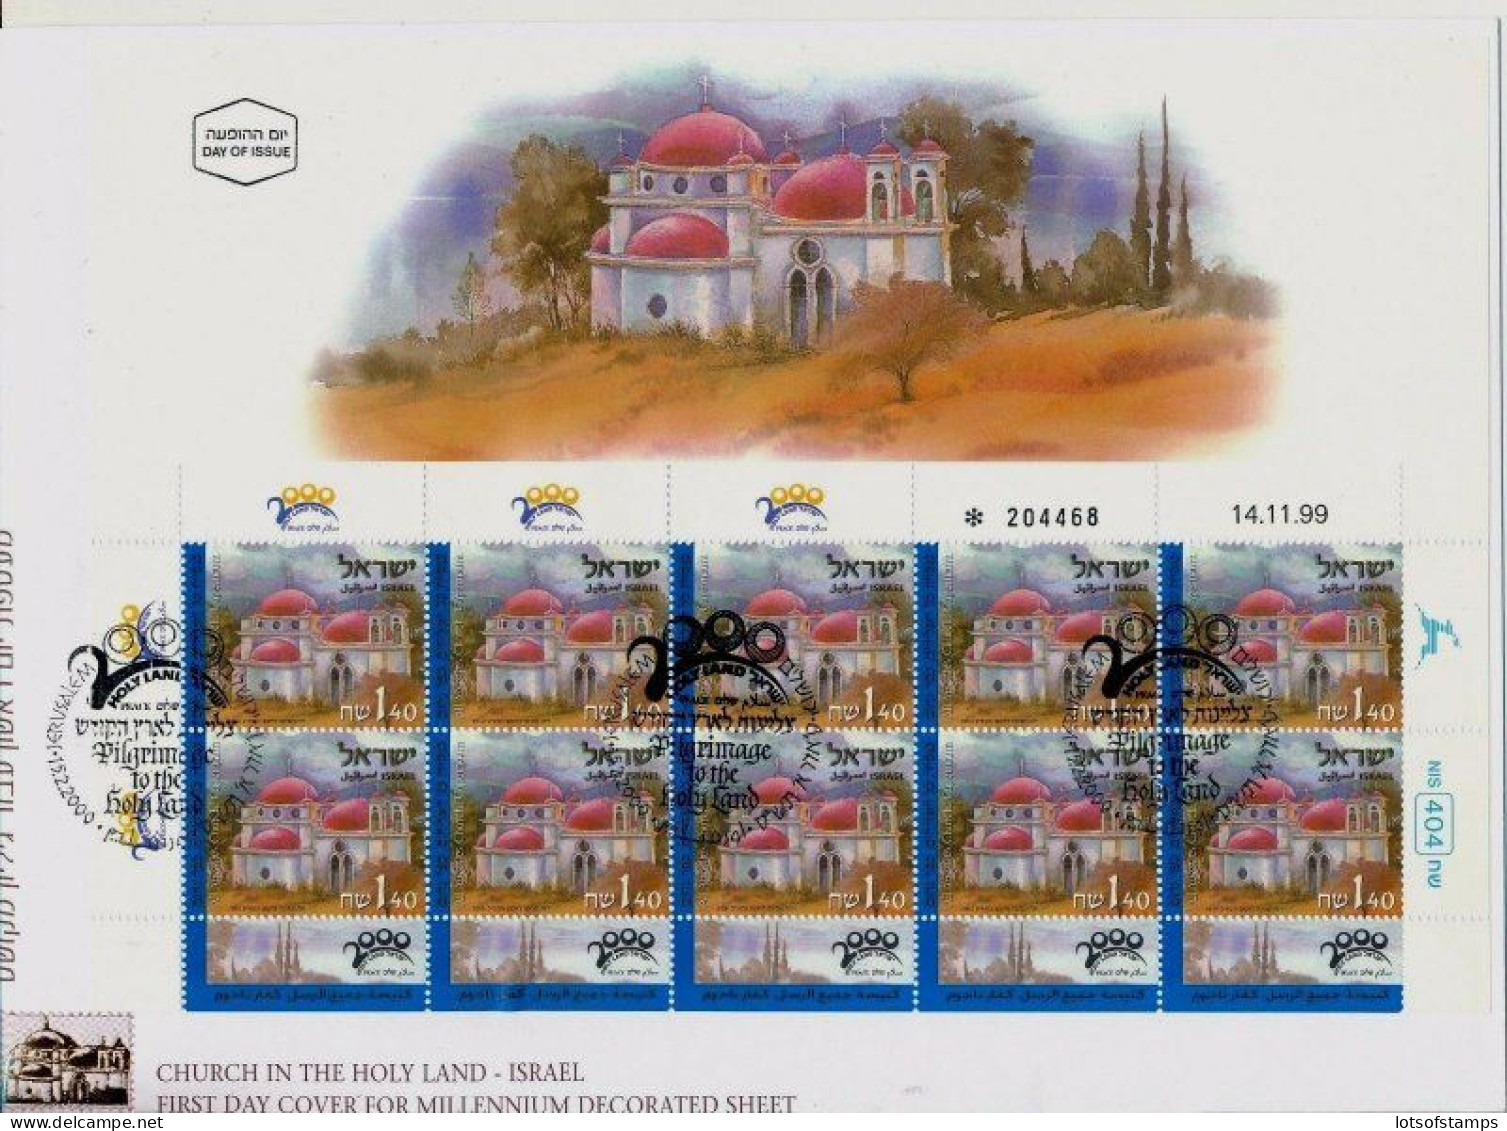 ISRAEL 2000 CHURCHES IN THE HOLY LAND 3 DECORATED 10 STAMP SHEETS FDC's SEE 3 SCANS - Briefe U. Dokumente